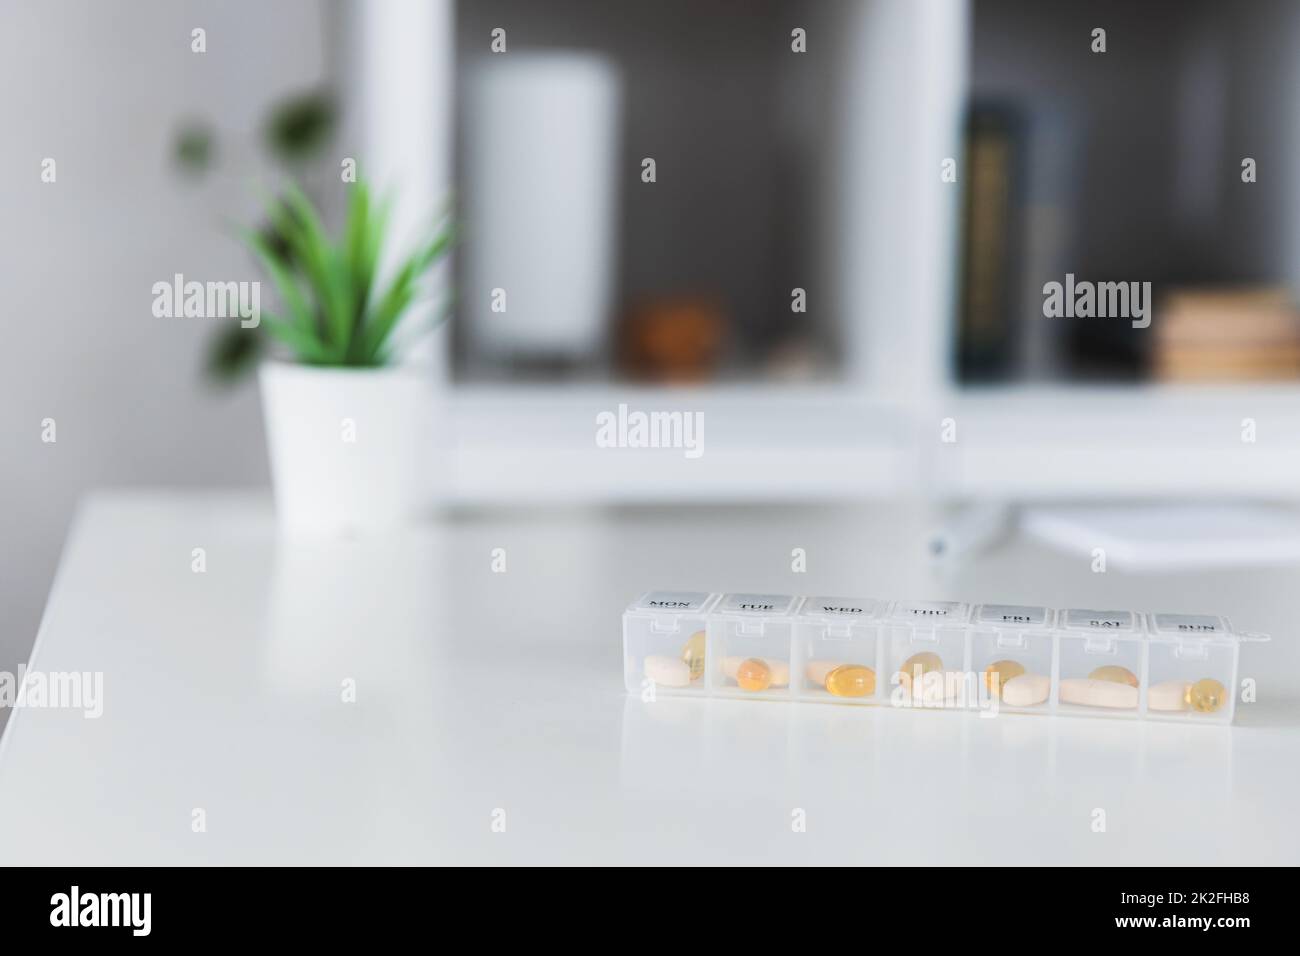 Medical pill box with tablet doses for daily take medicine with drugs, capsules Stock Photo